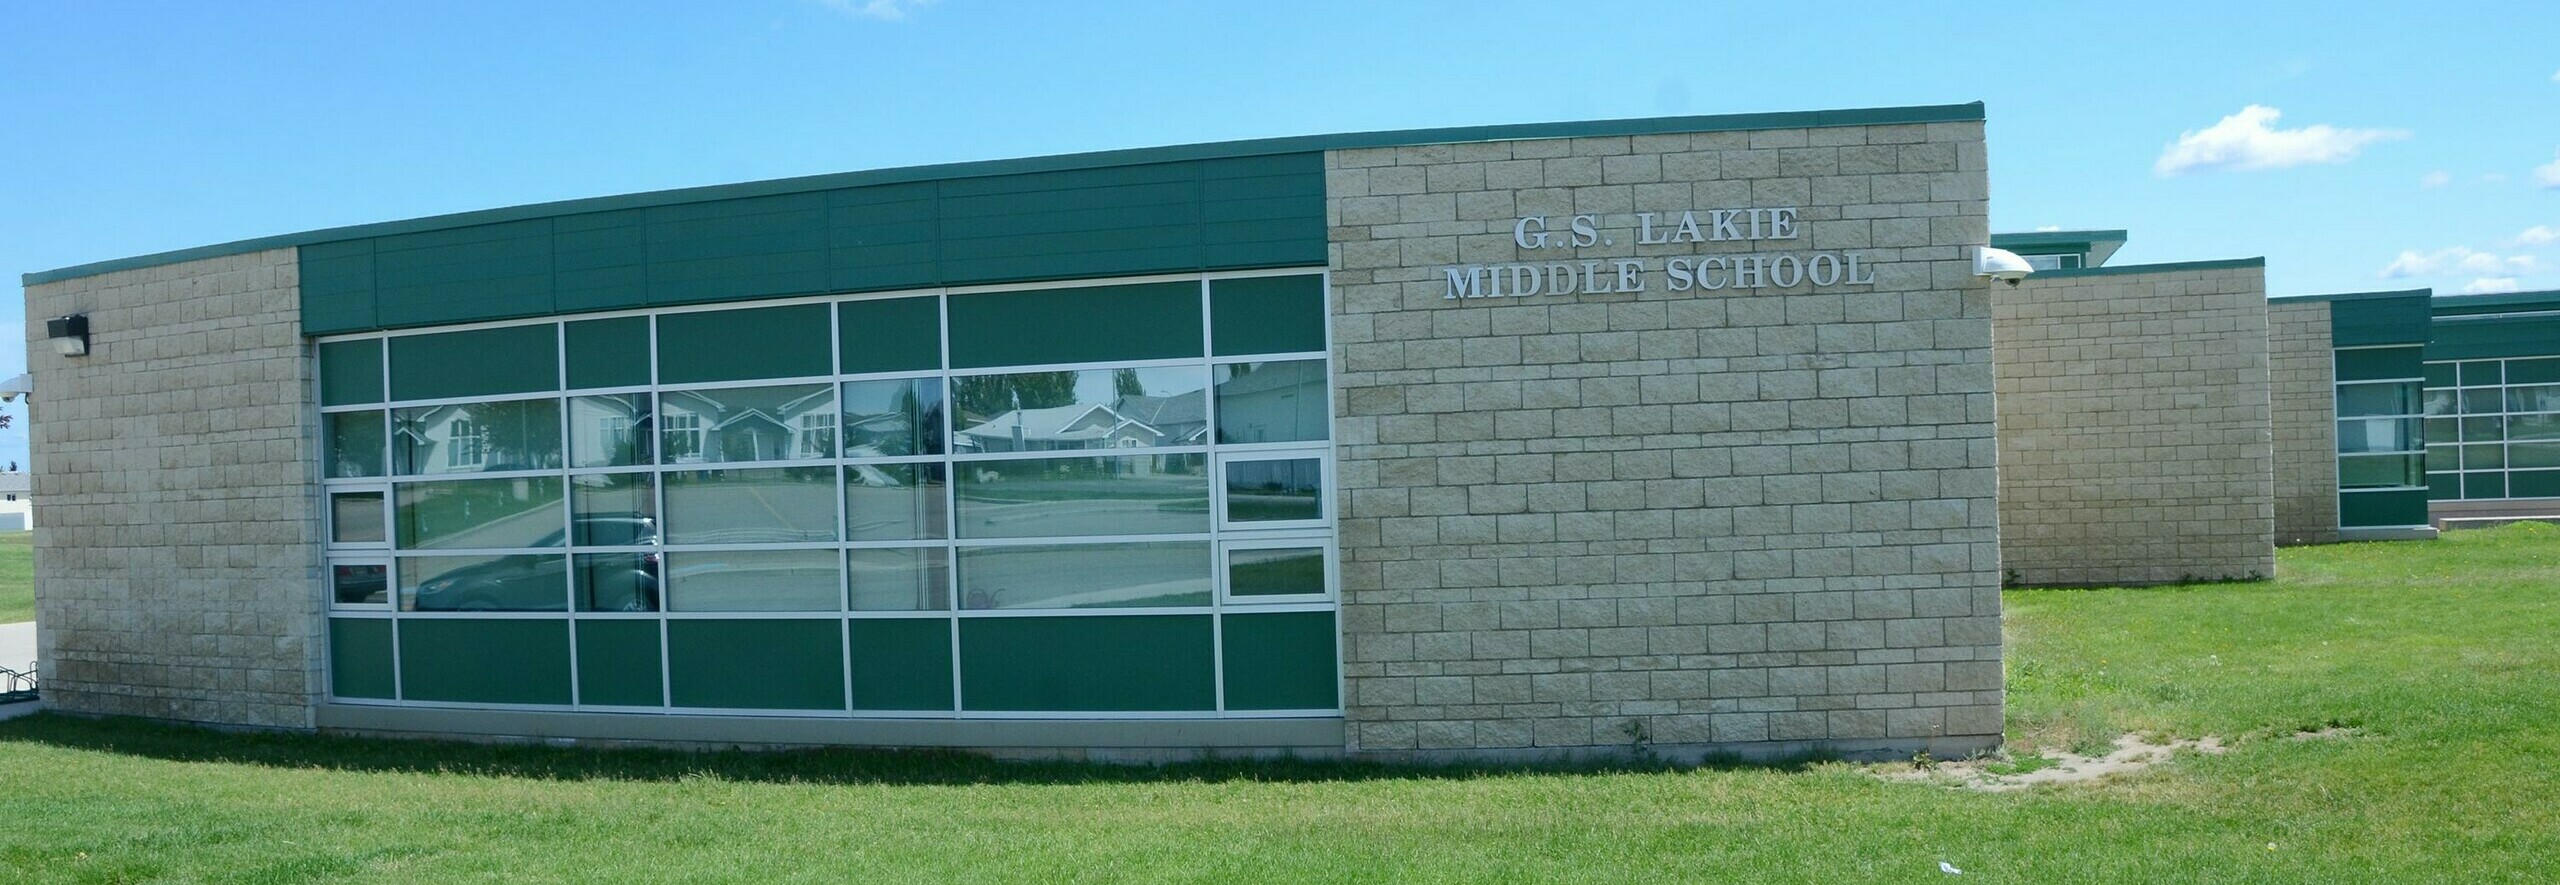 G.S. Lakie Middle School Banner Photo